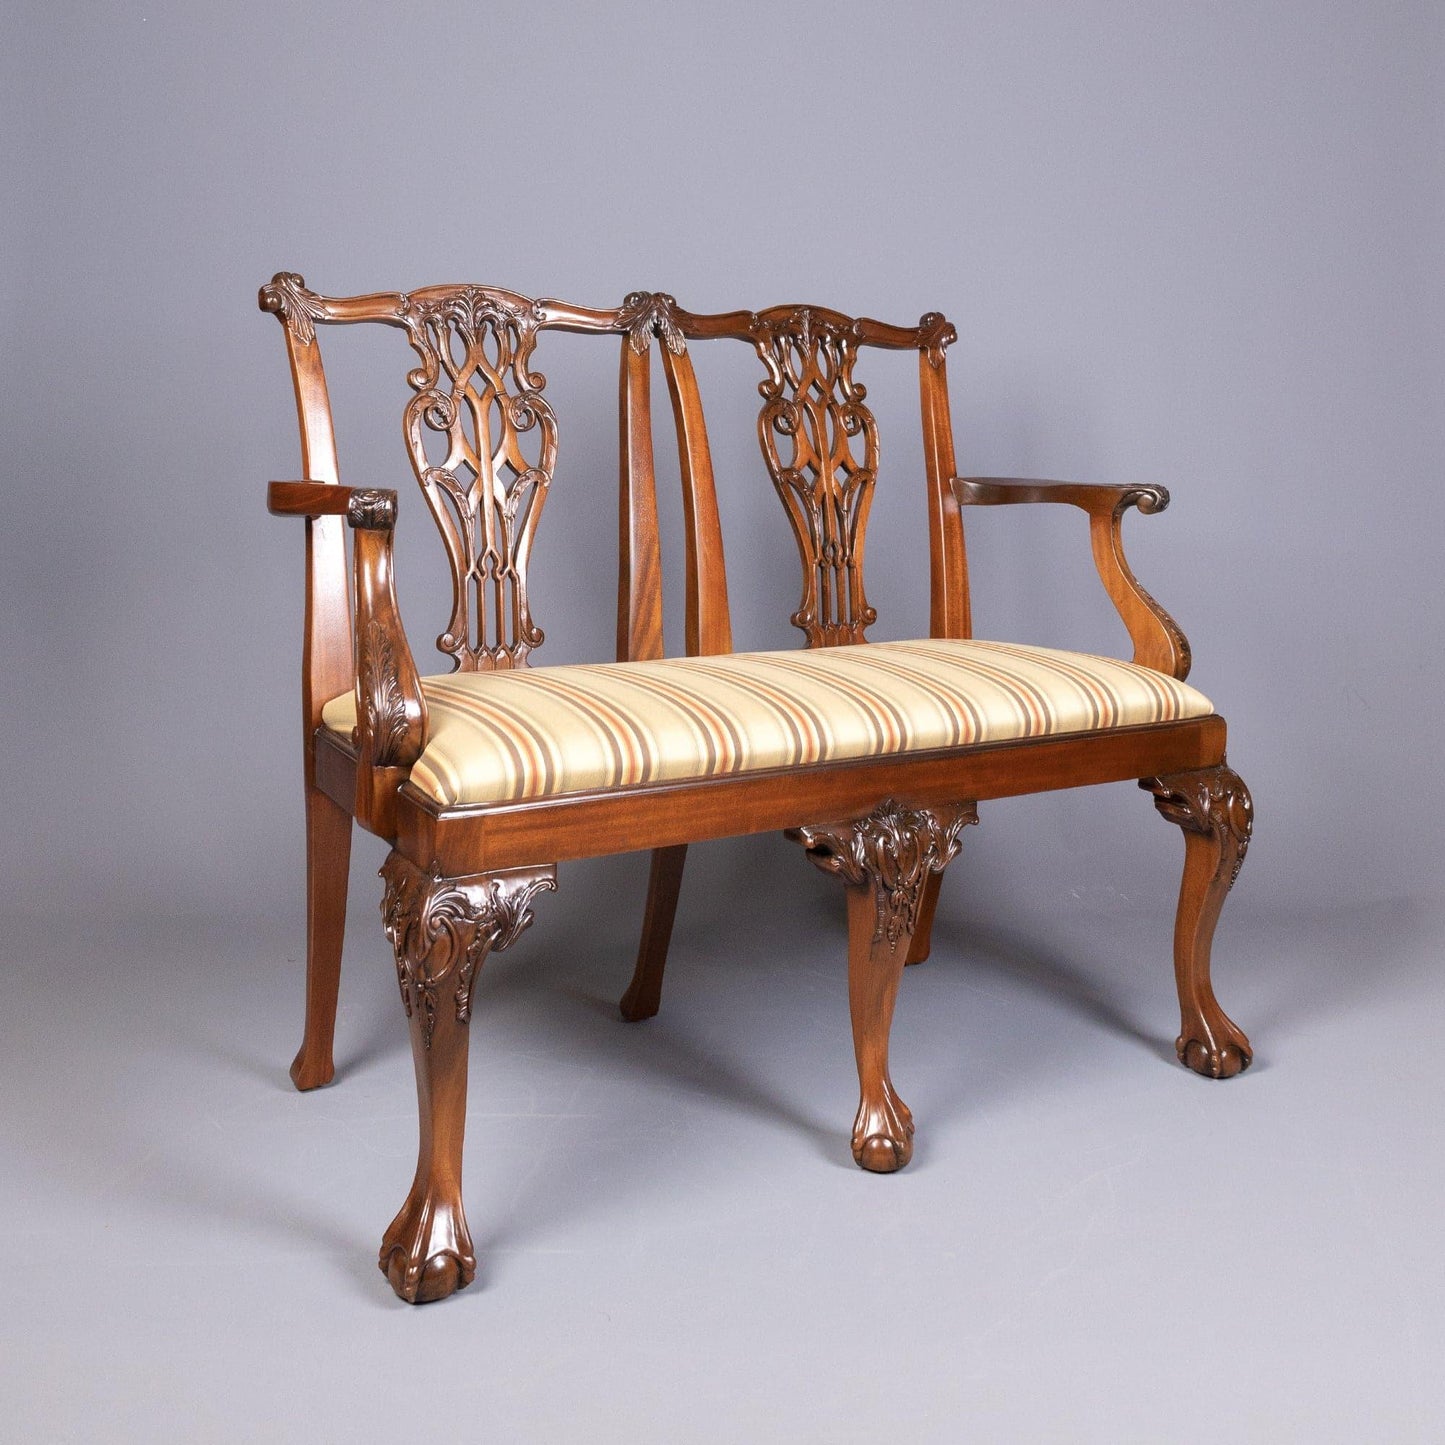 CHIPPENDALE LOVESEAT - House of Chippendale